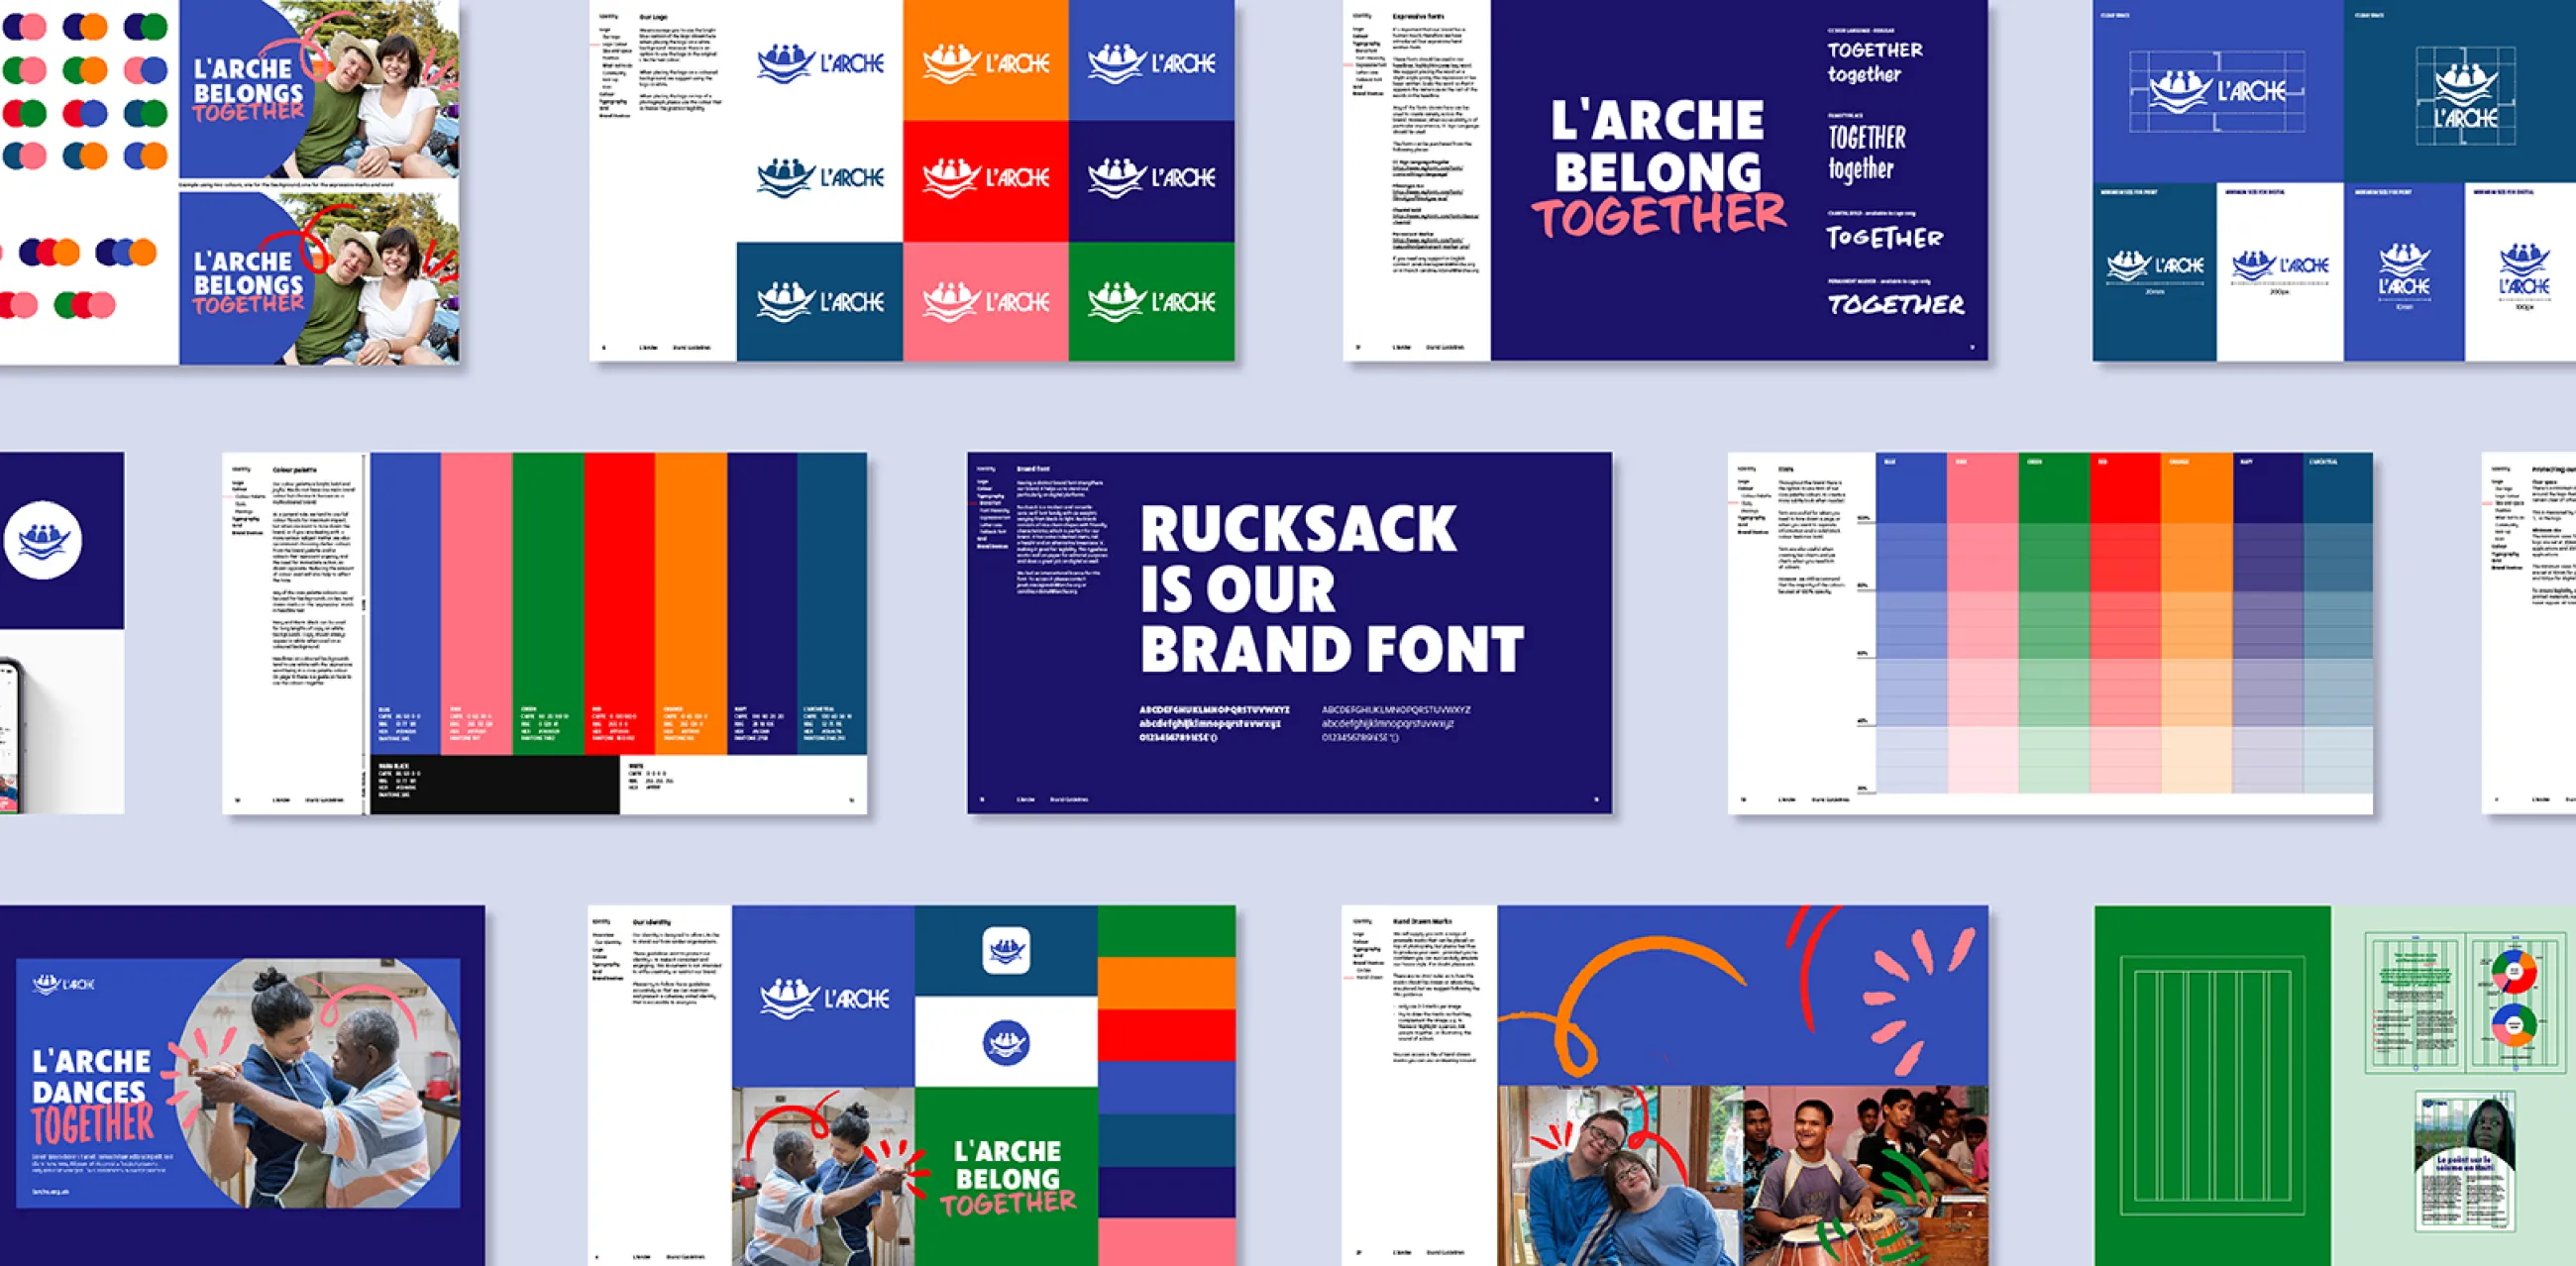 Various layouts from the L'Arche brand guidelines showing how to combine the different brand elements and colours